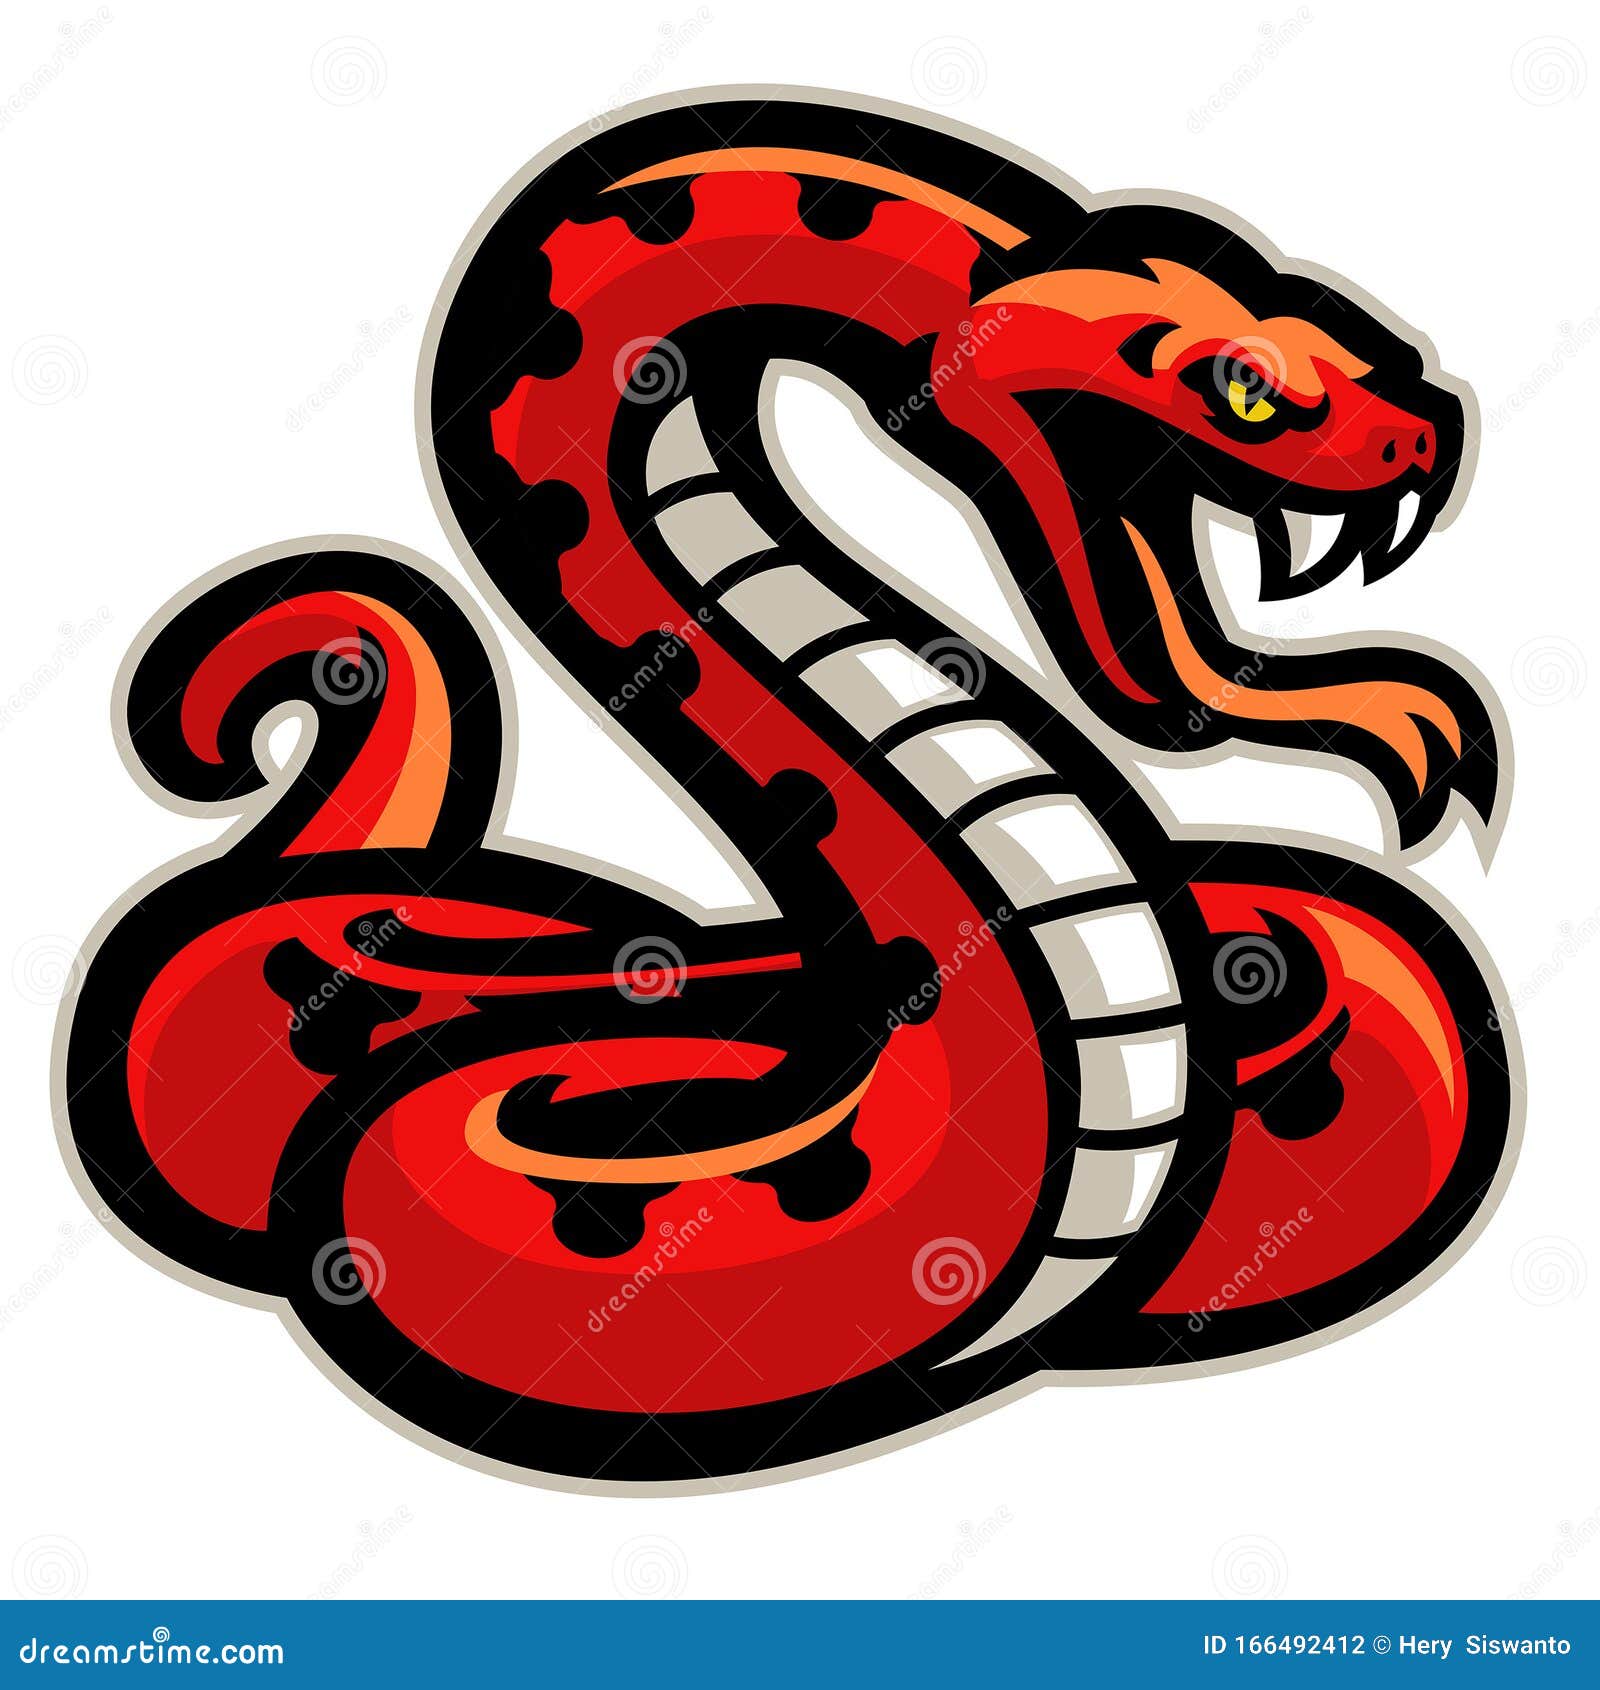 red snake mascot ready to attack